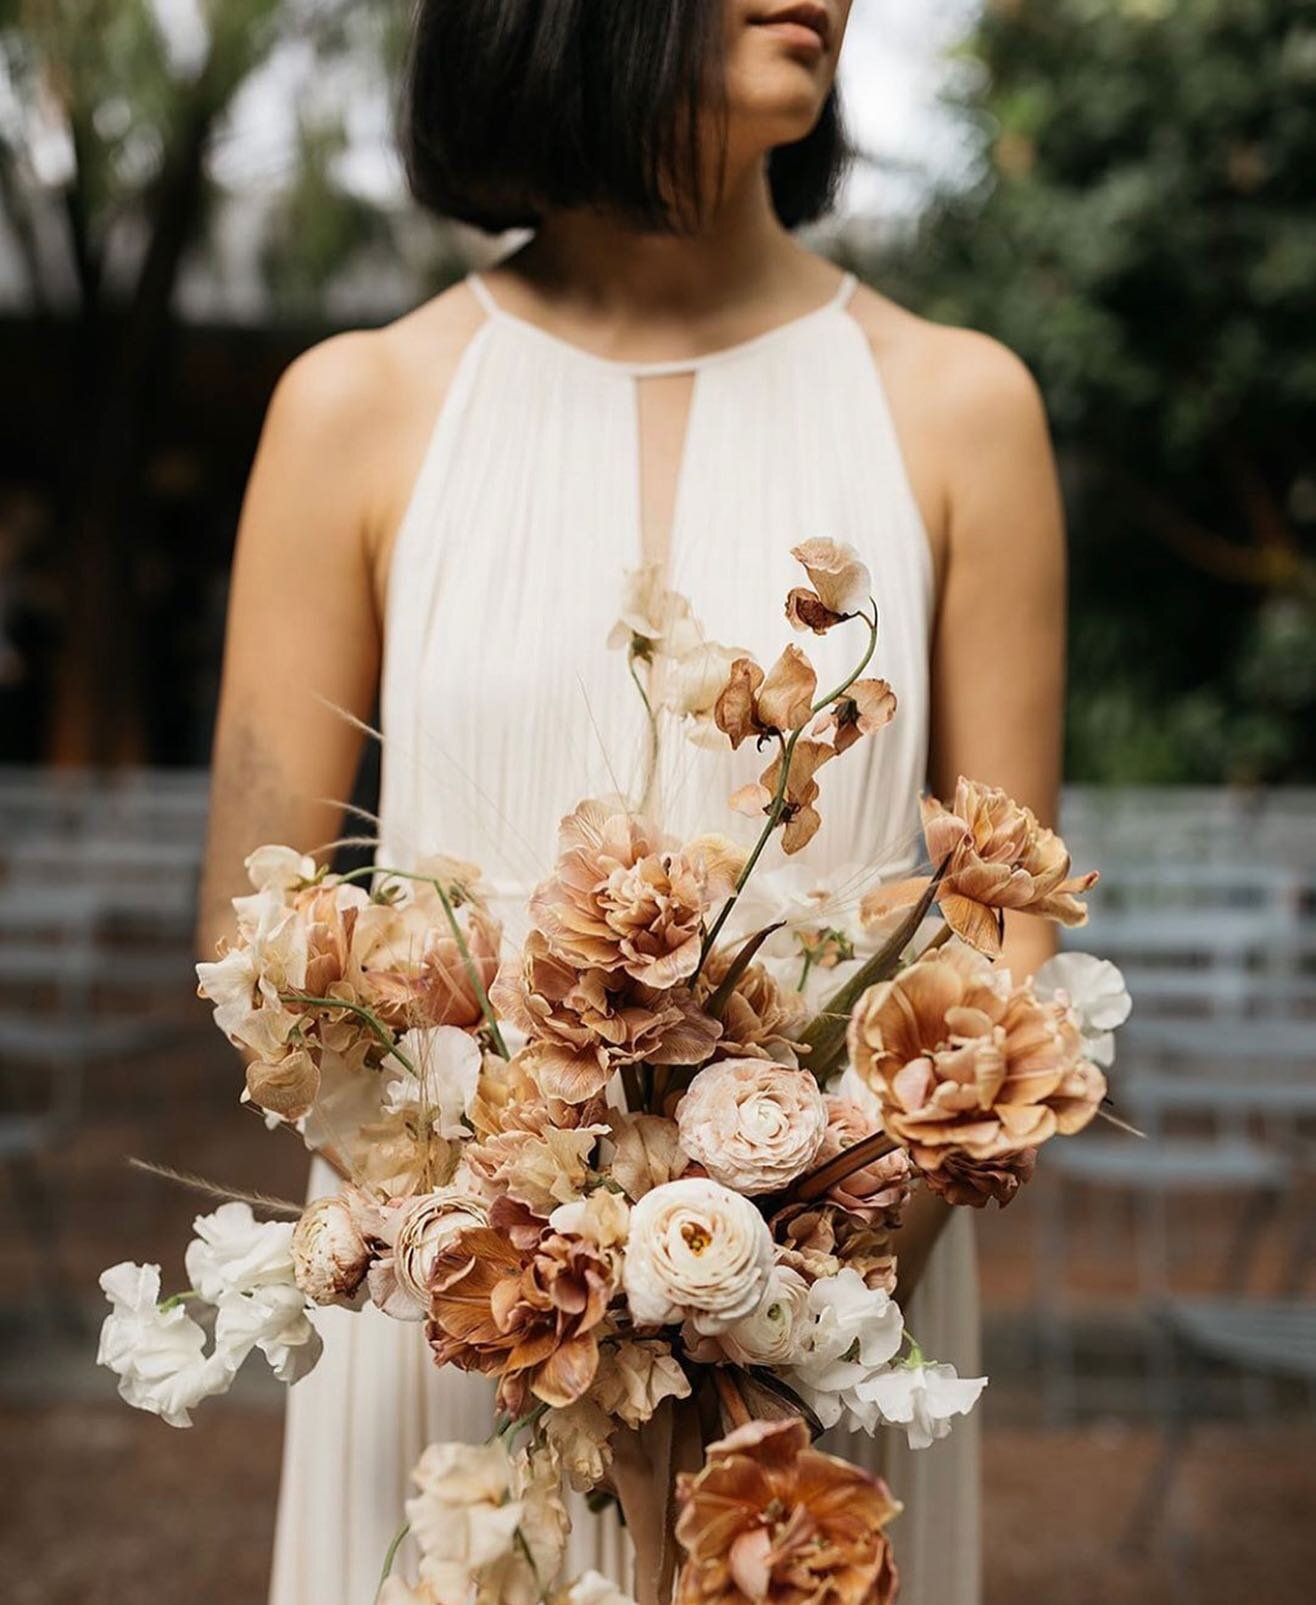 BEST BUDS: This gorgeous bouquet by @hart_floral is giving us all the autumn feels 🤗 Photo: @lifestorieswedding 
Wedding Planner: @gatherist_